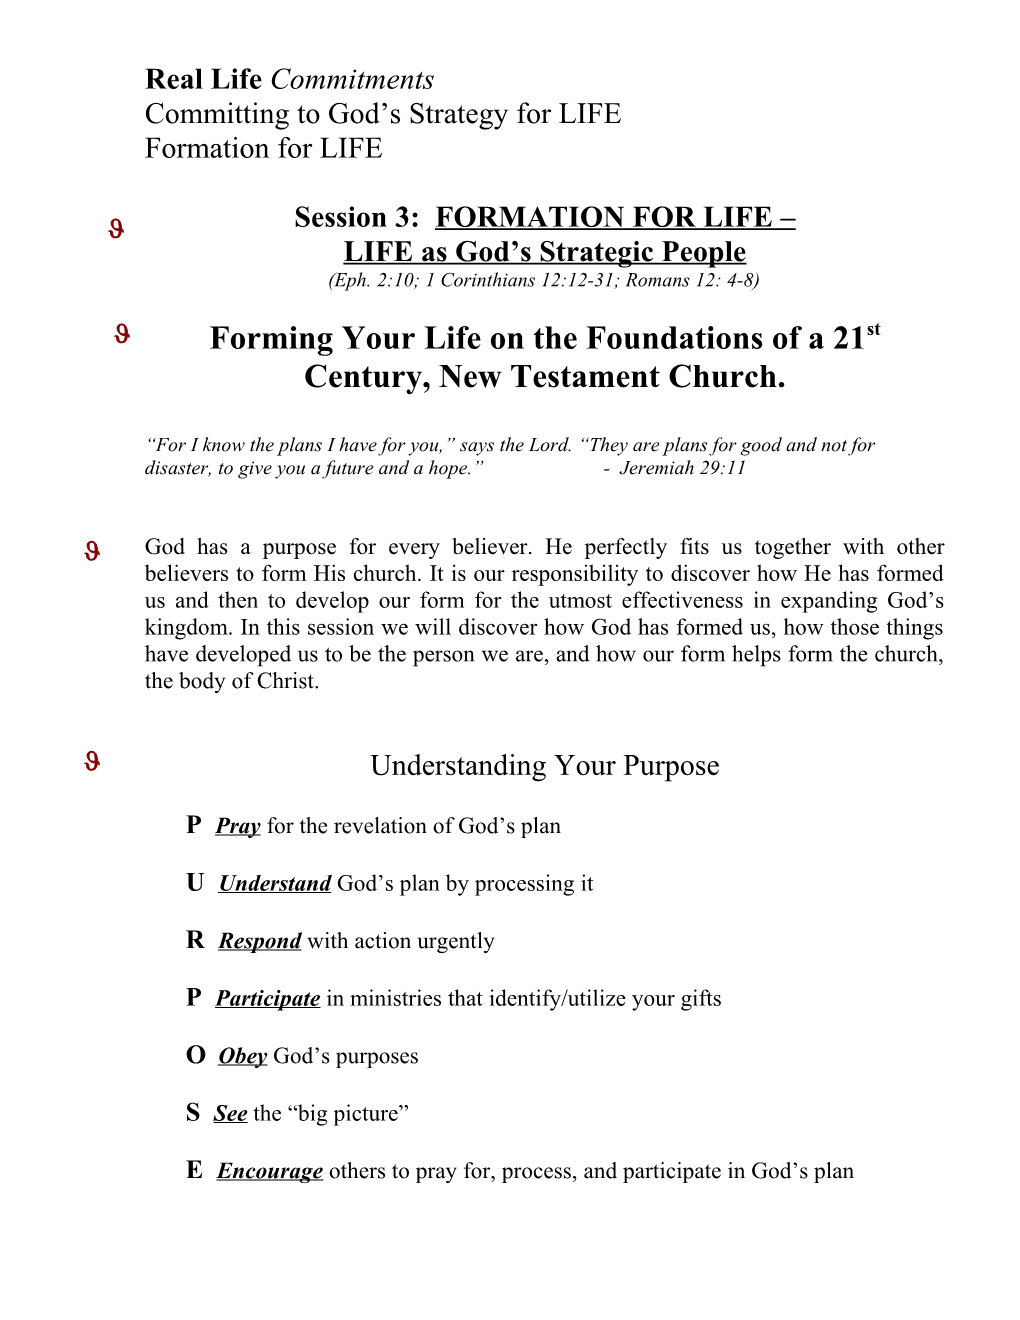 Session 3: FORMATION for LIFE